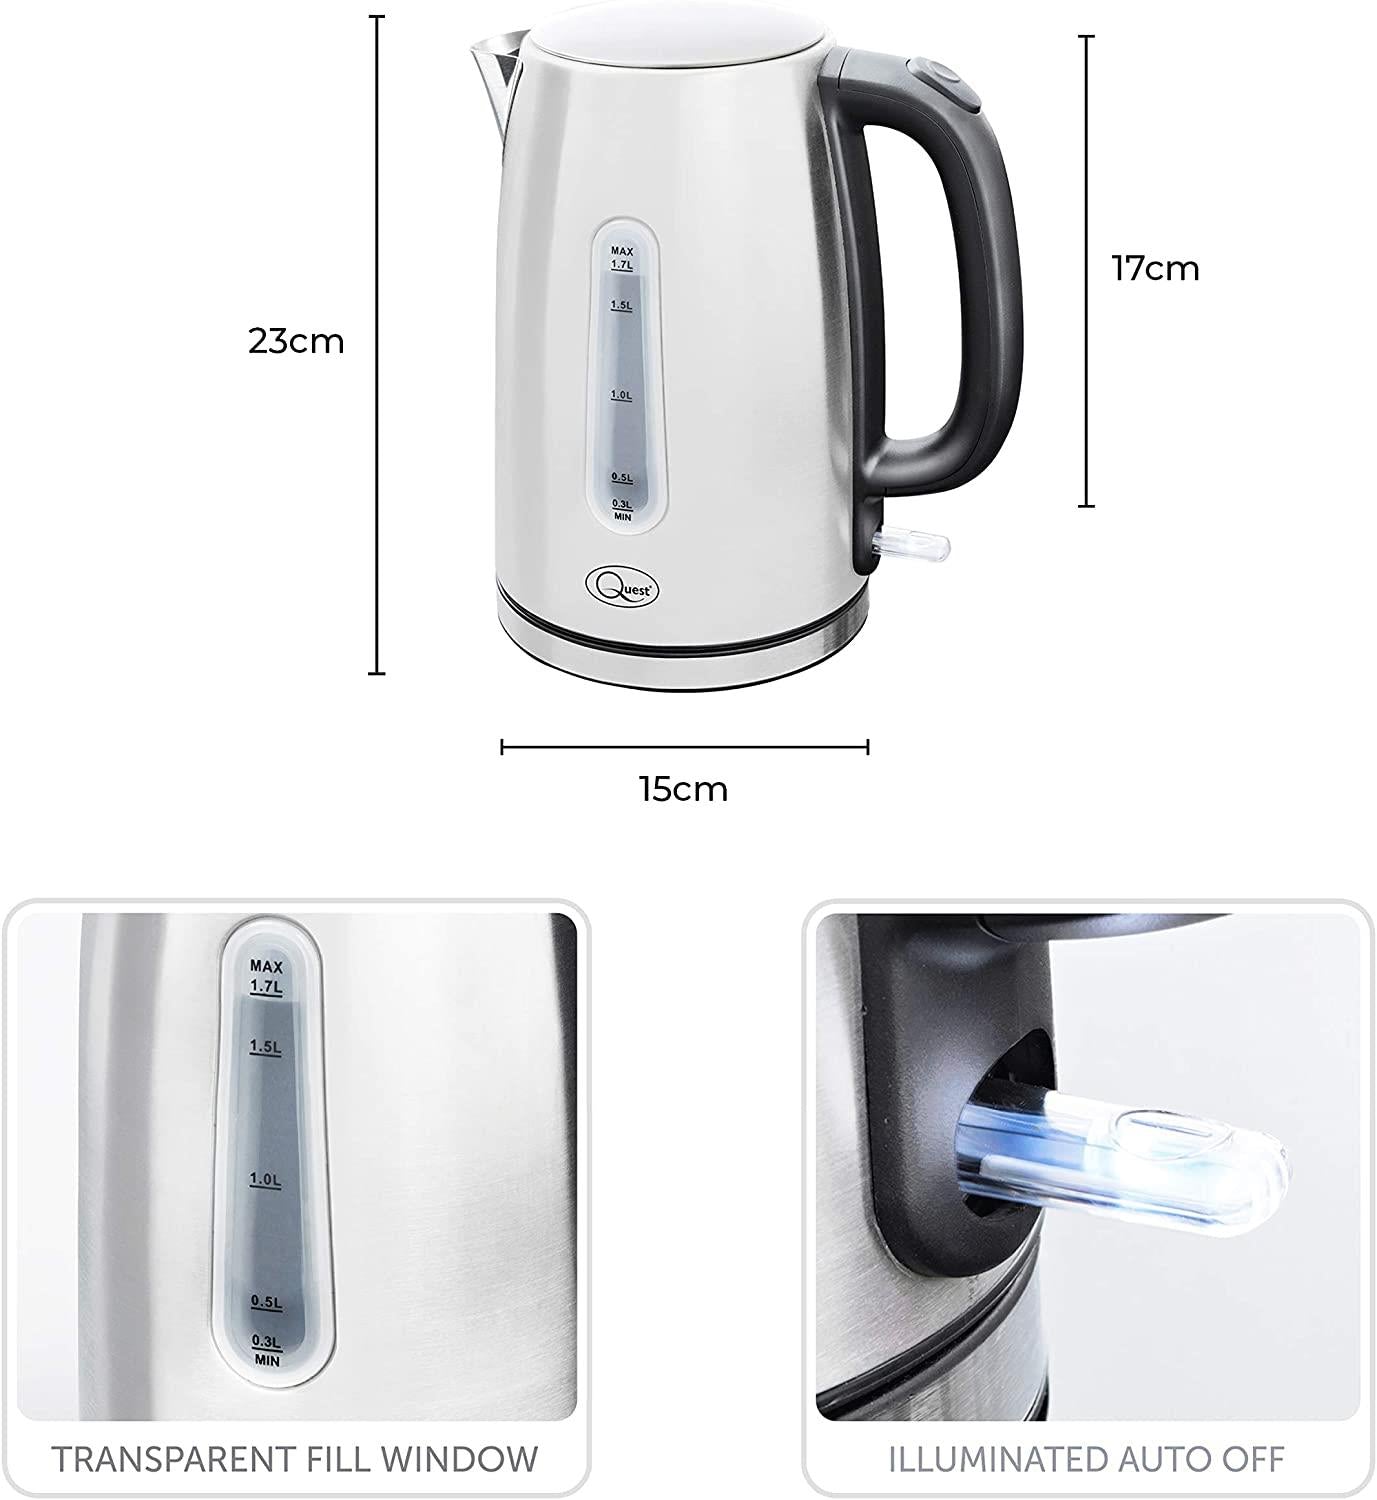 Quest Rapid Boil Full Stainless Steel Kettle 1.7L (Carton of 6)